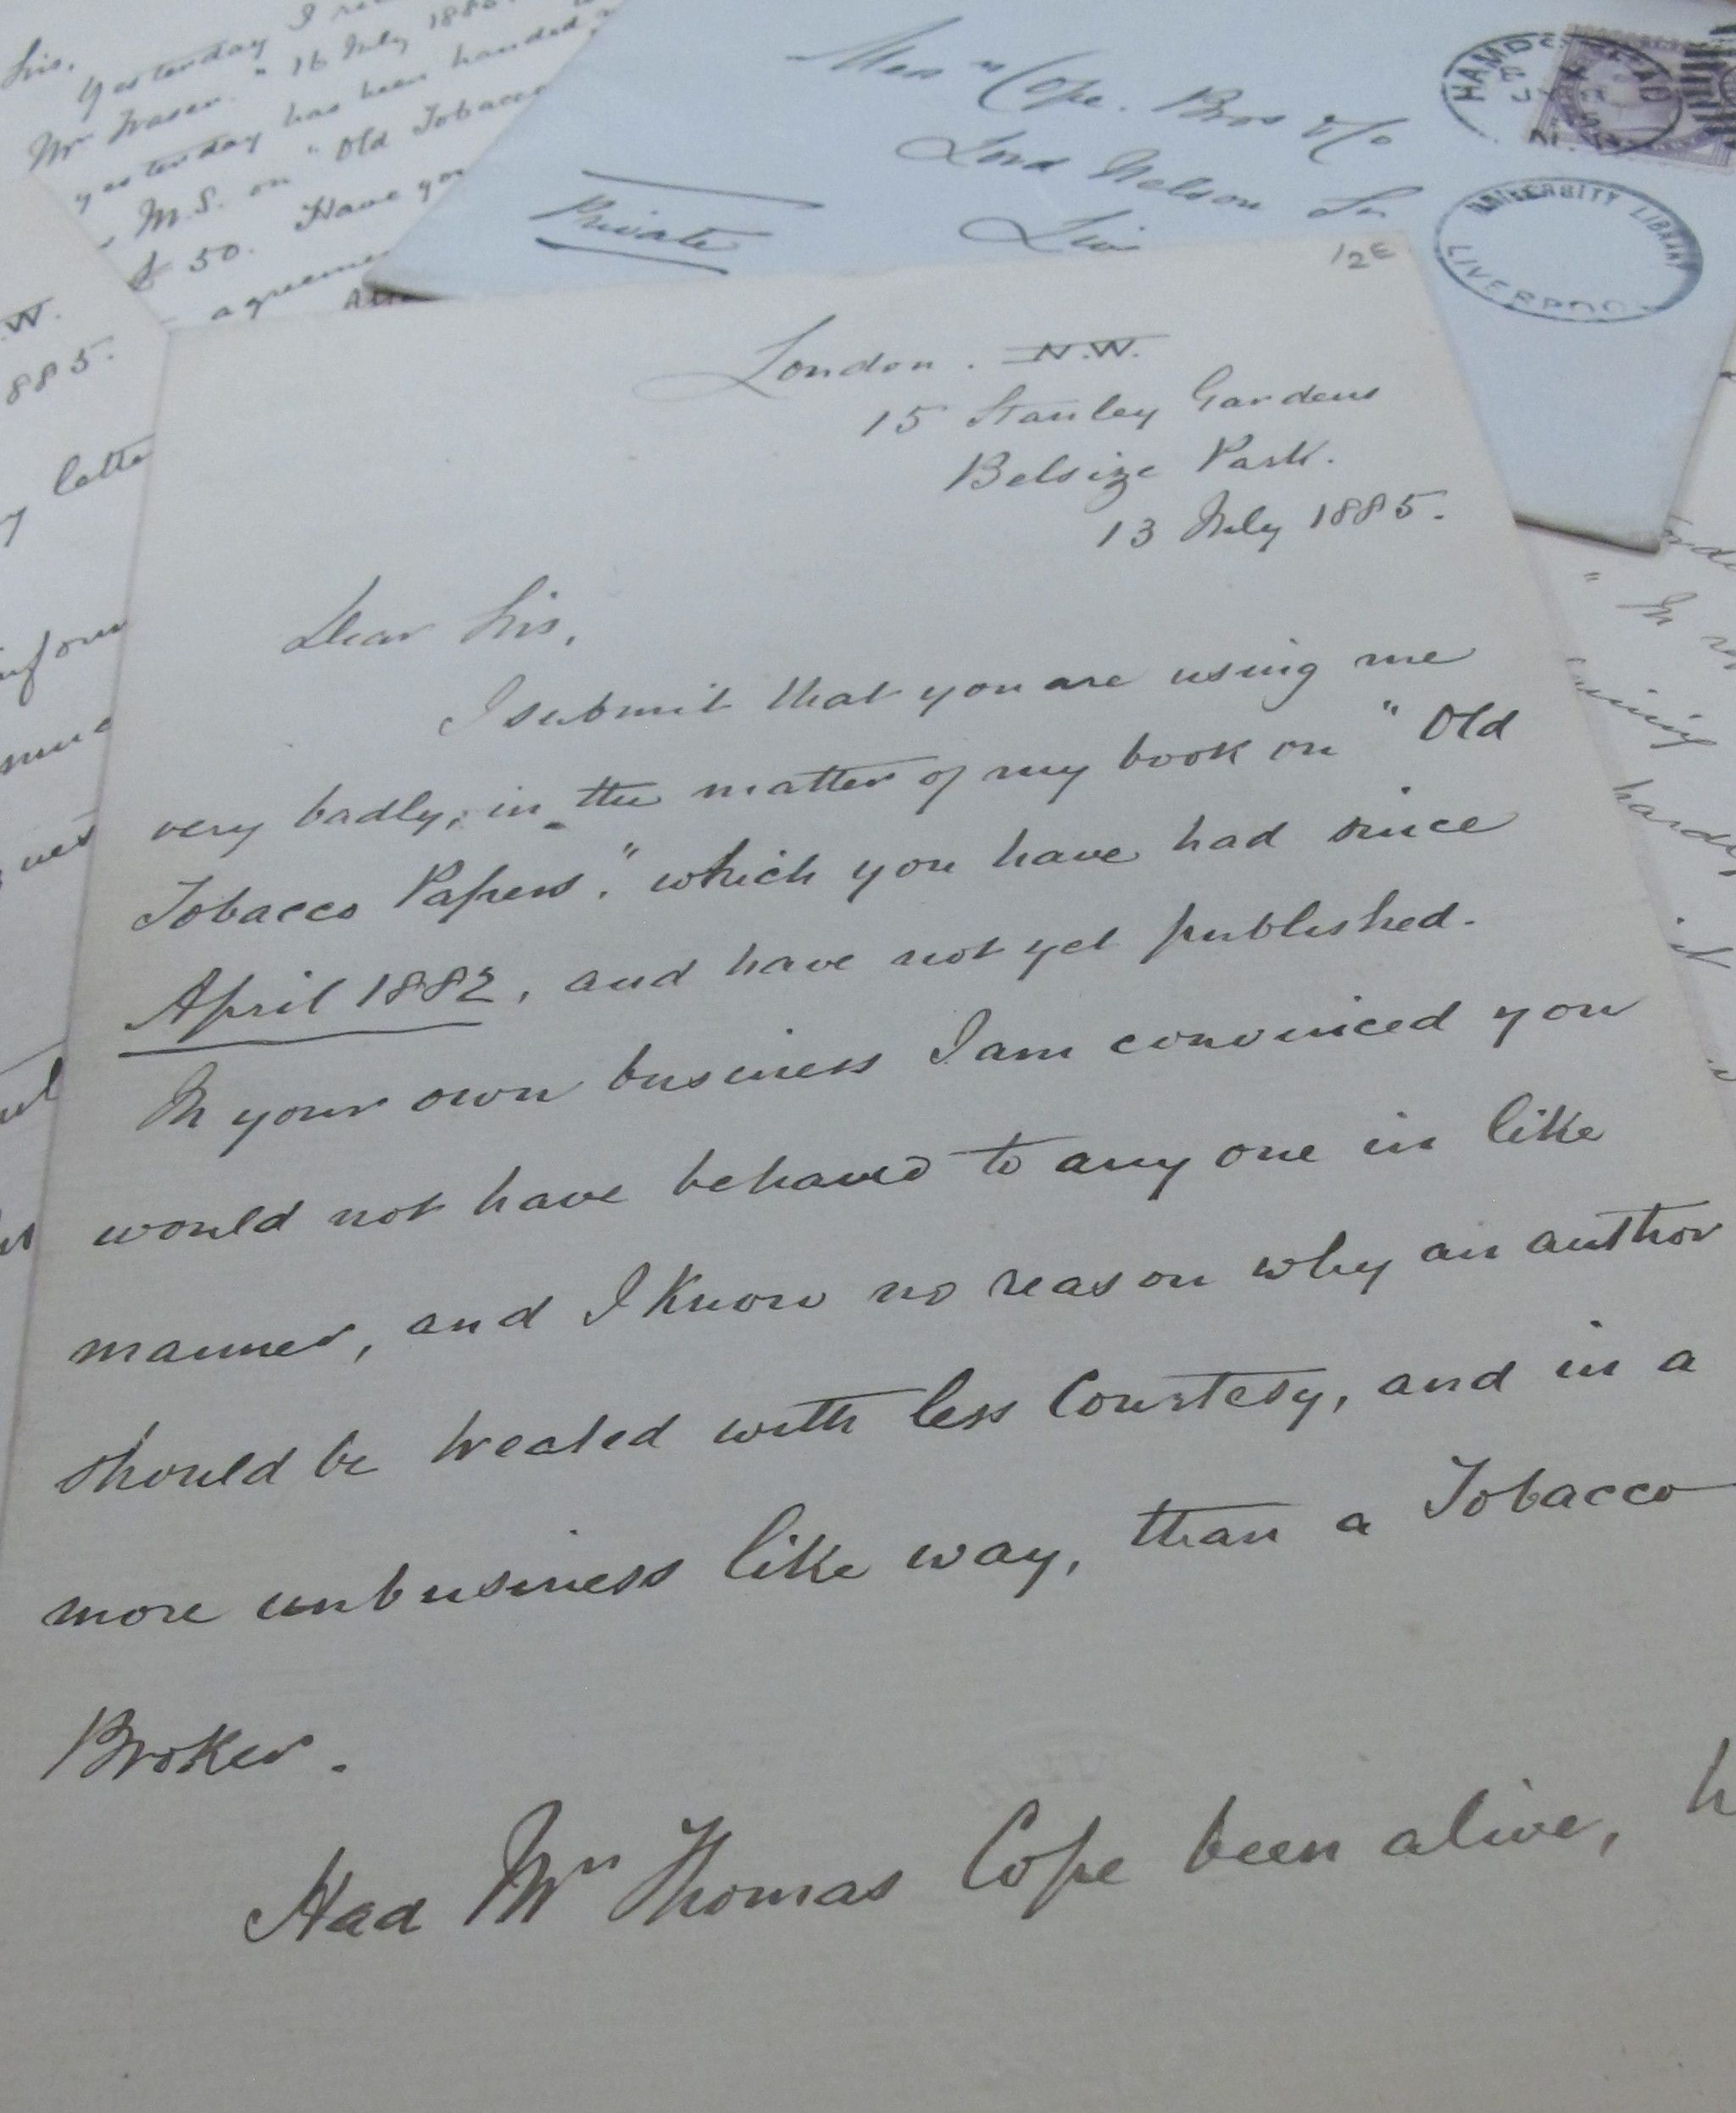 Image of handwritten letters from 1885.